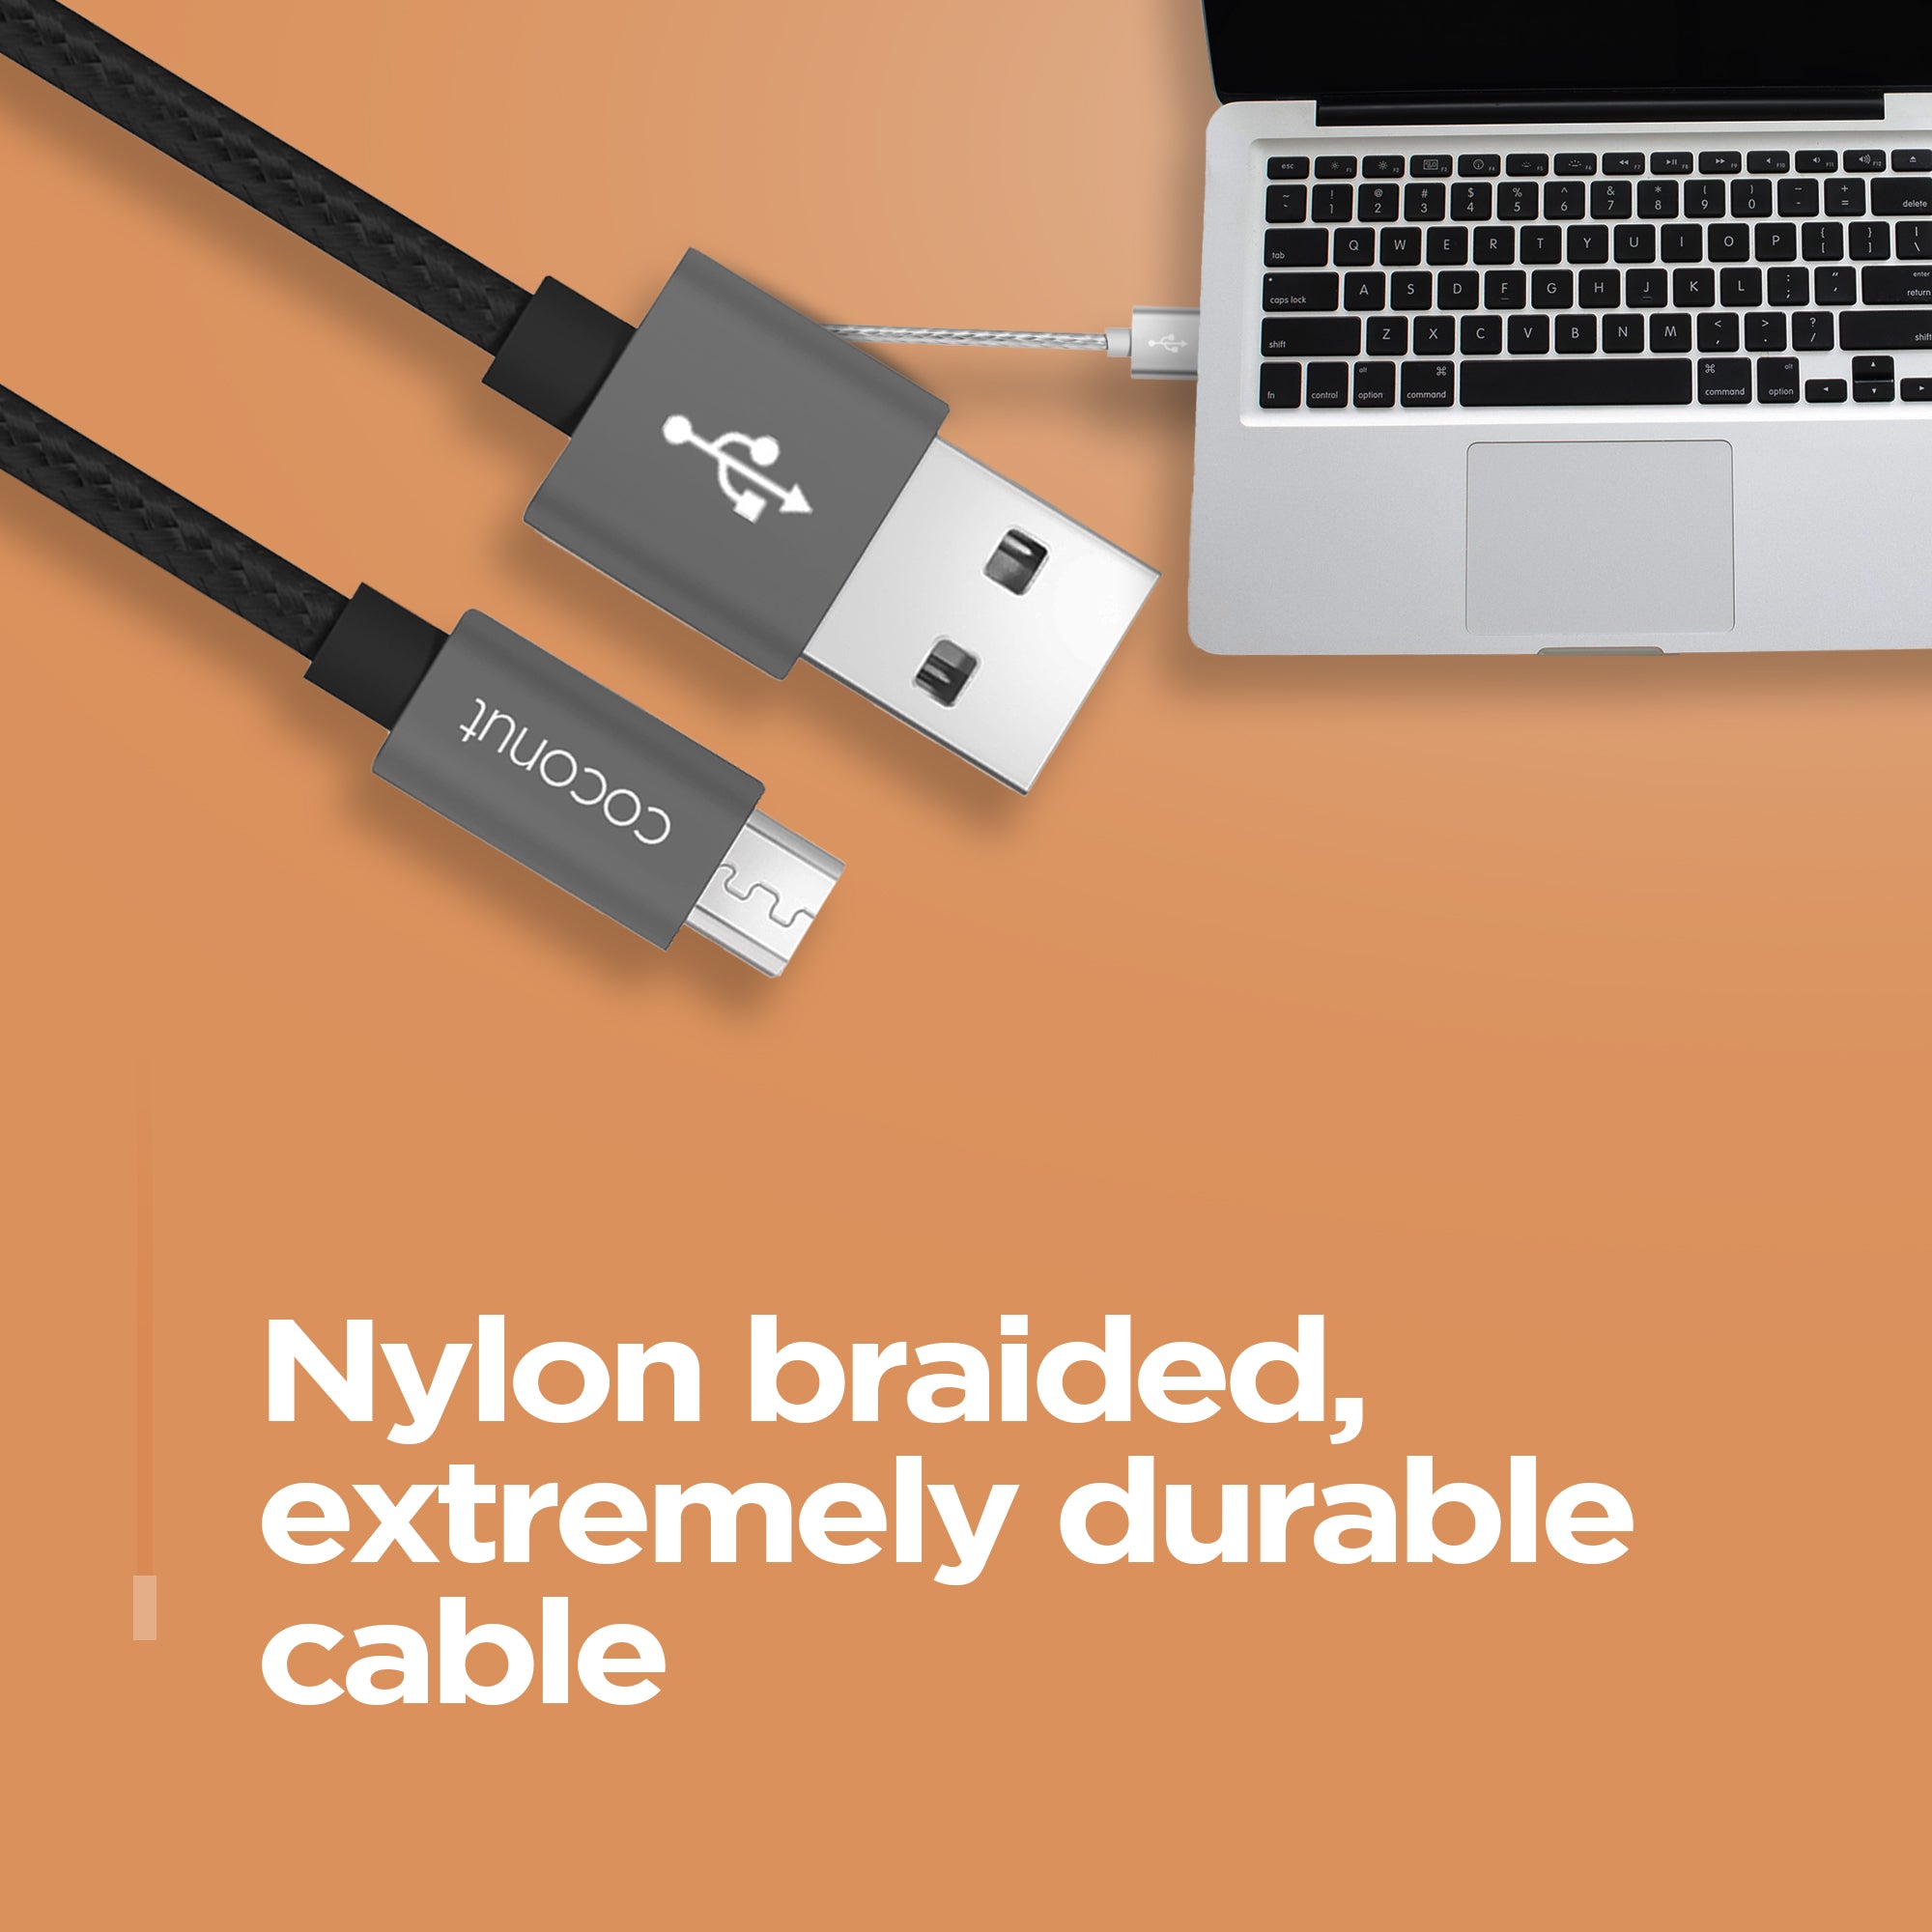 C12 Micro USB Charge & Sync Cable - 1M